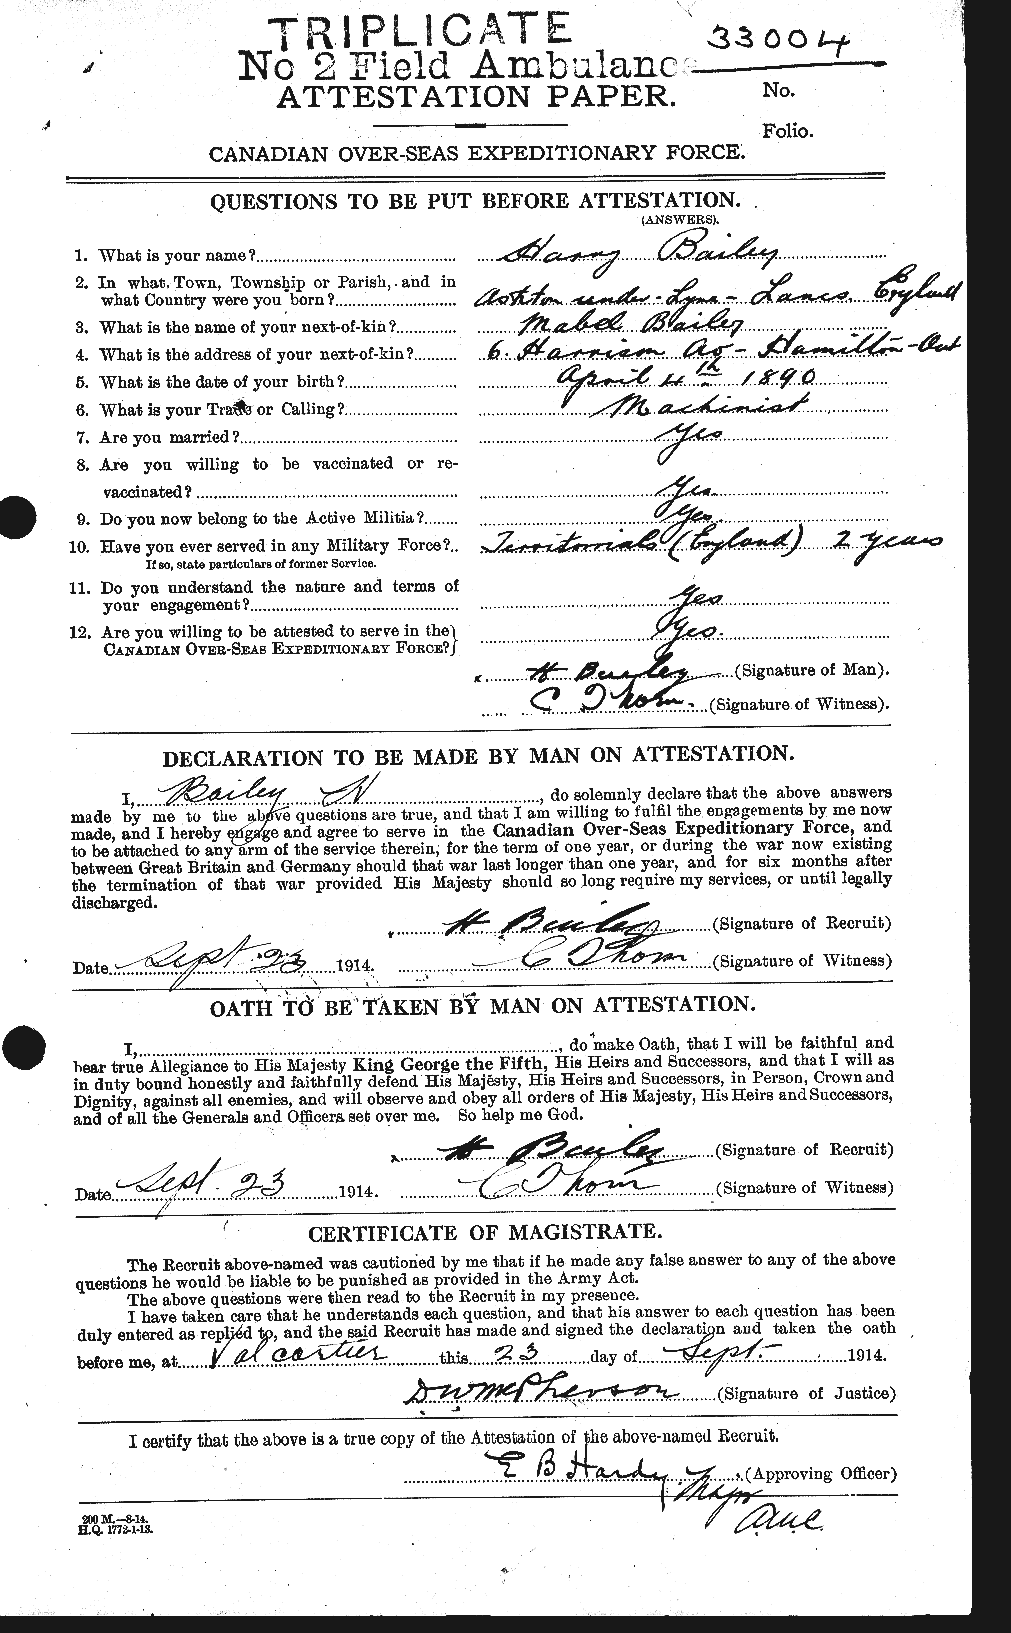 Personnel Records of the First World War - CEF 218909a